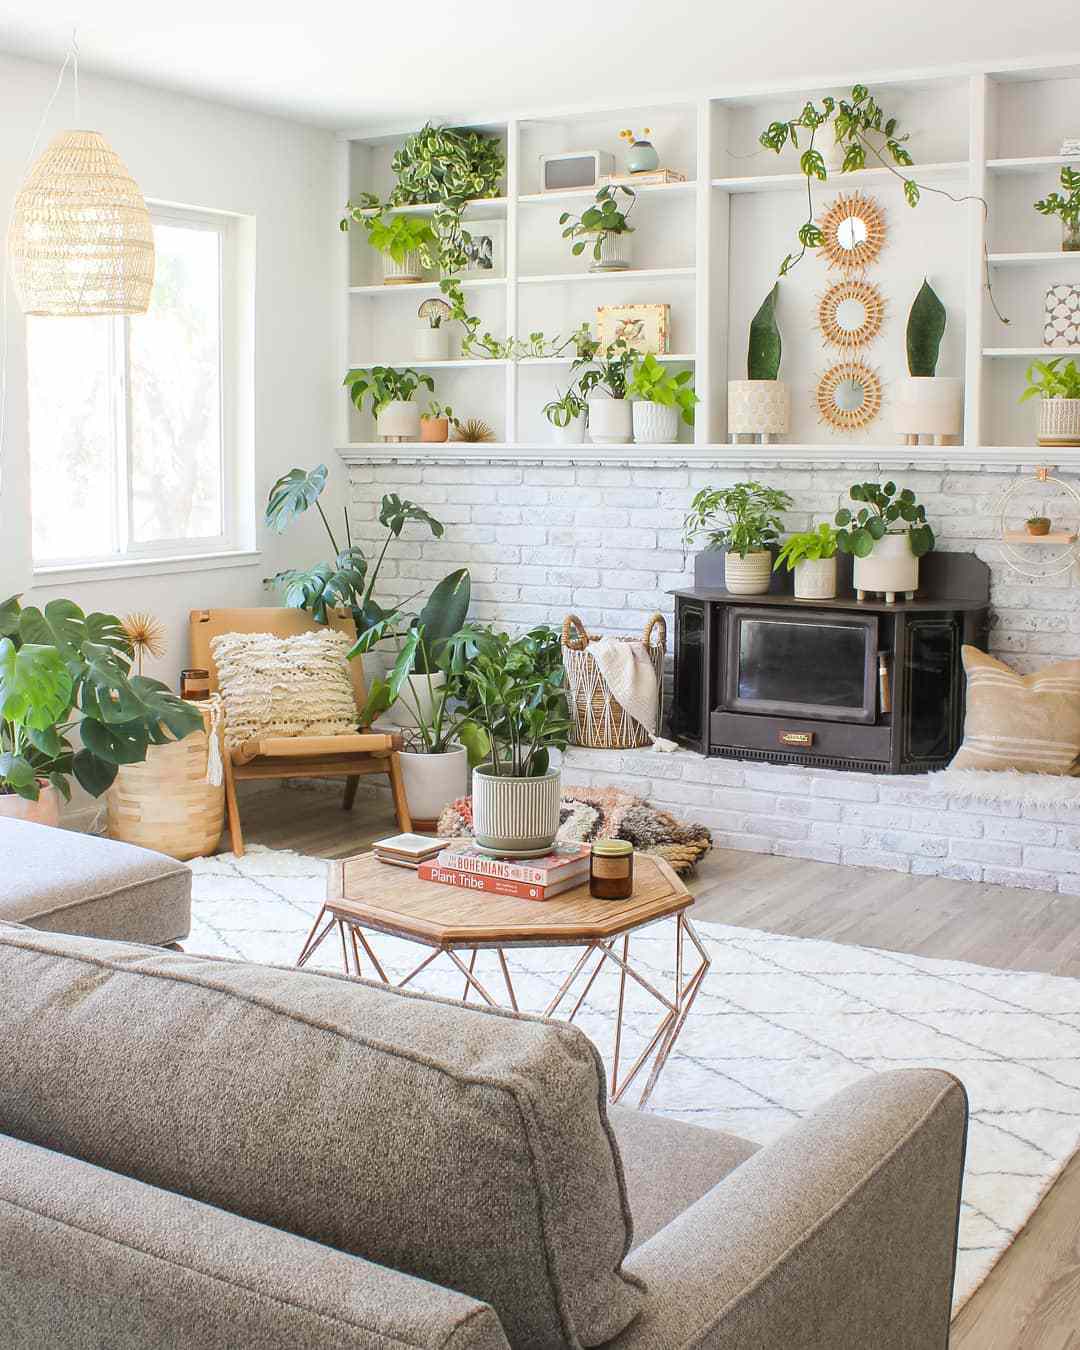 Home Décor with Plants